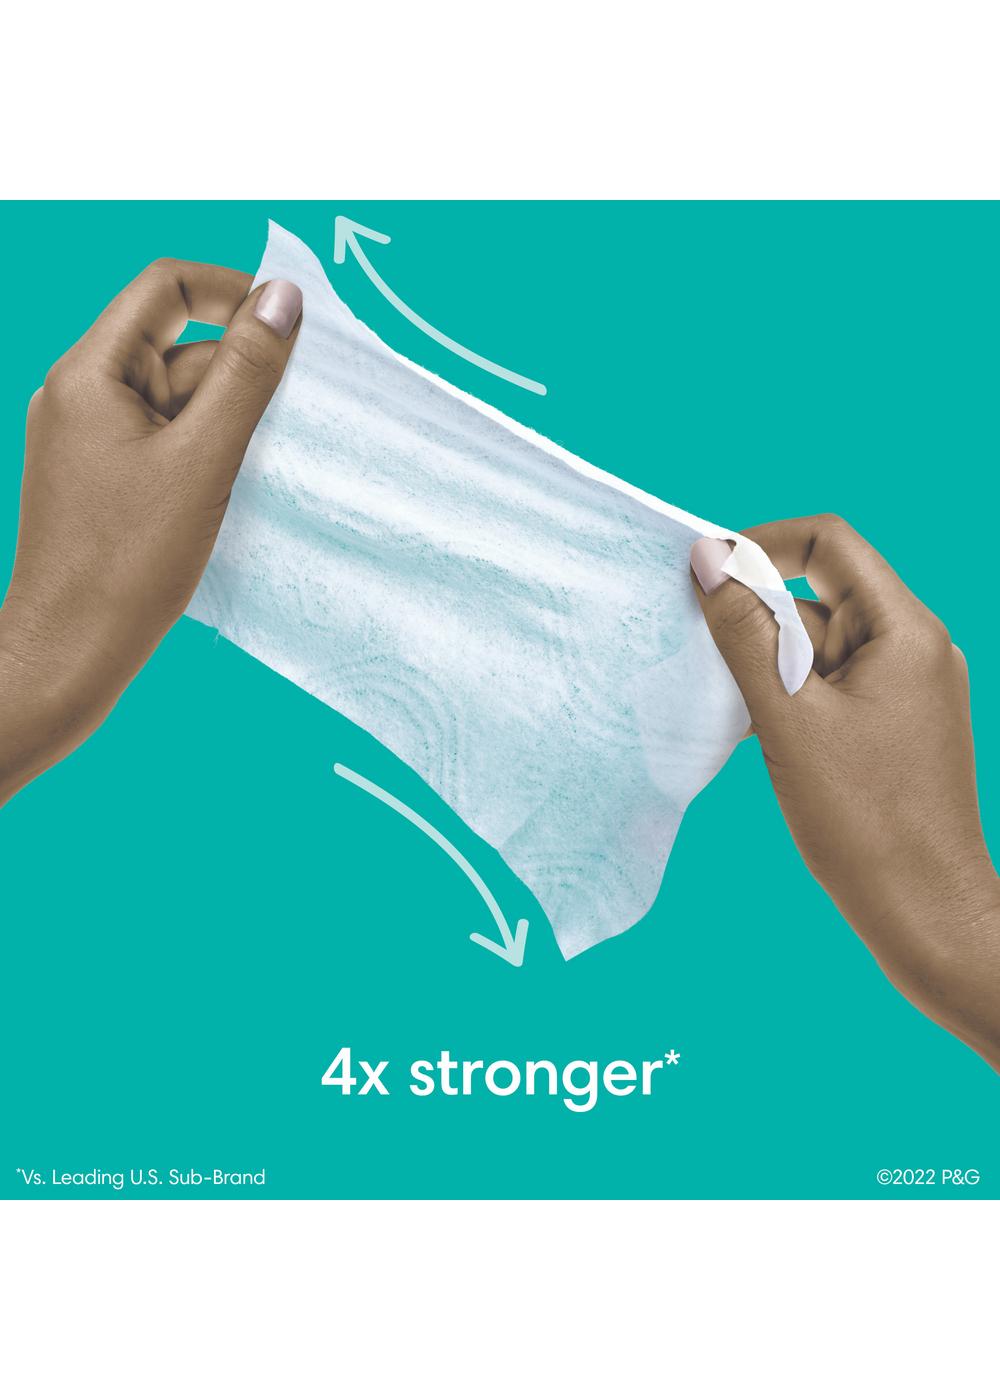 Pampers Fresh Scented Baby Wipes 6 Pk; image 3 of 11